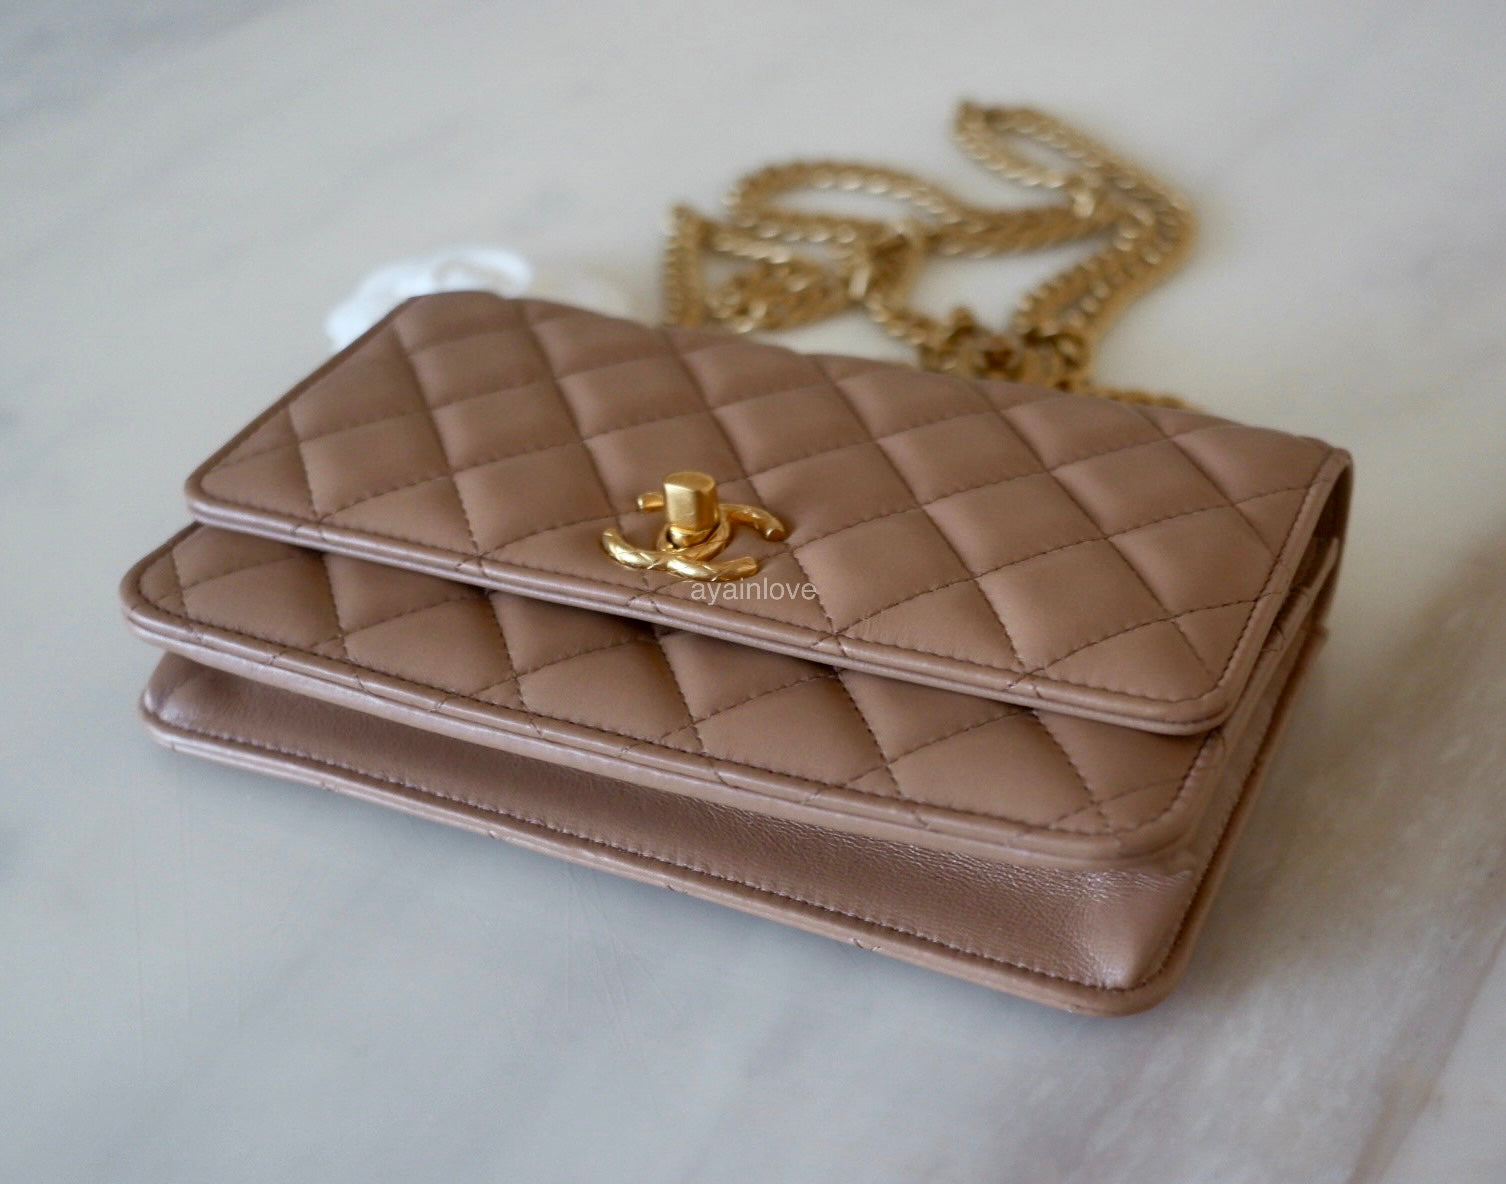 Chanel Dark Beige Quilted Caviar Leather Classic Woc Clutch Bag